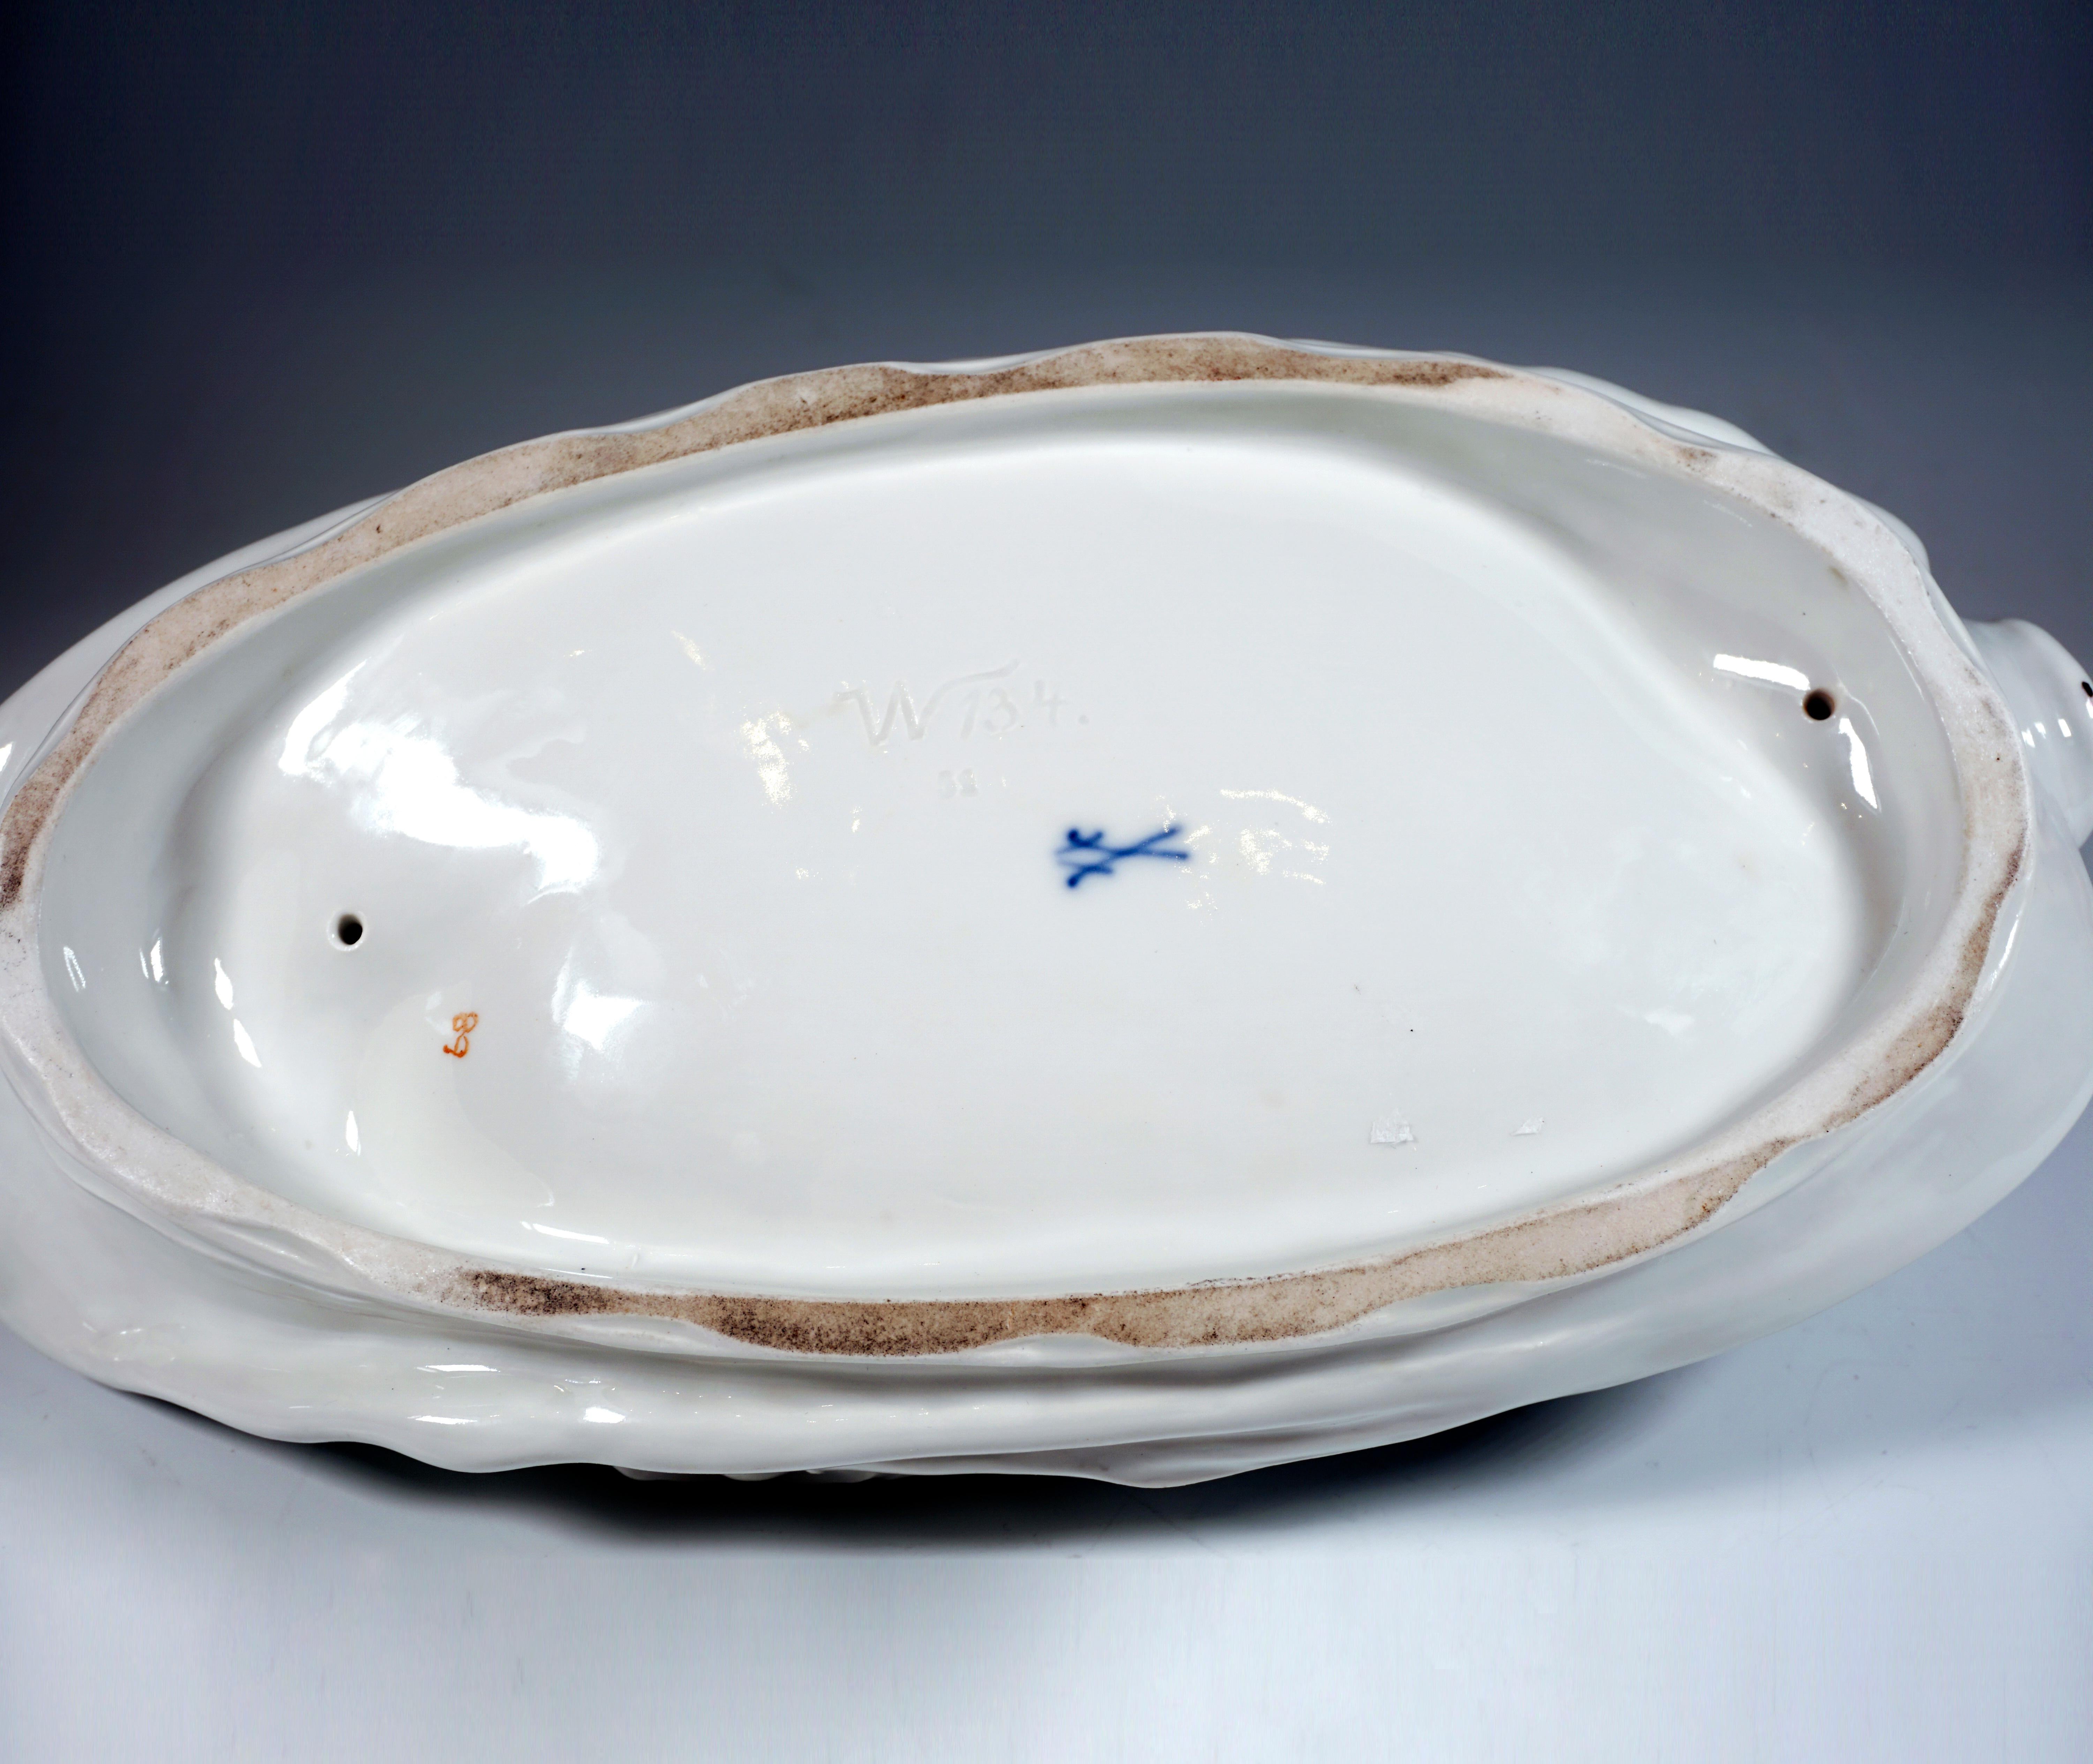 Early 20th Century Art Nouveau Bowl with Nymph and Girl, by P. Helmig, Meissen Germany, ca 1910 For Sale